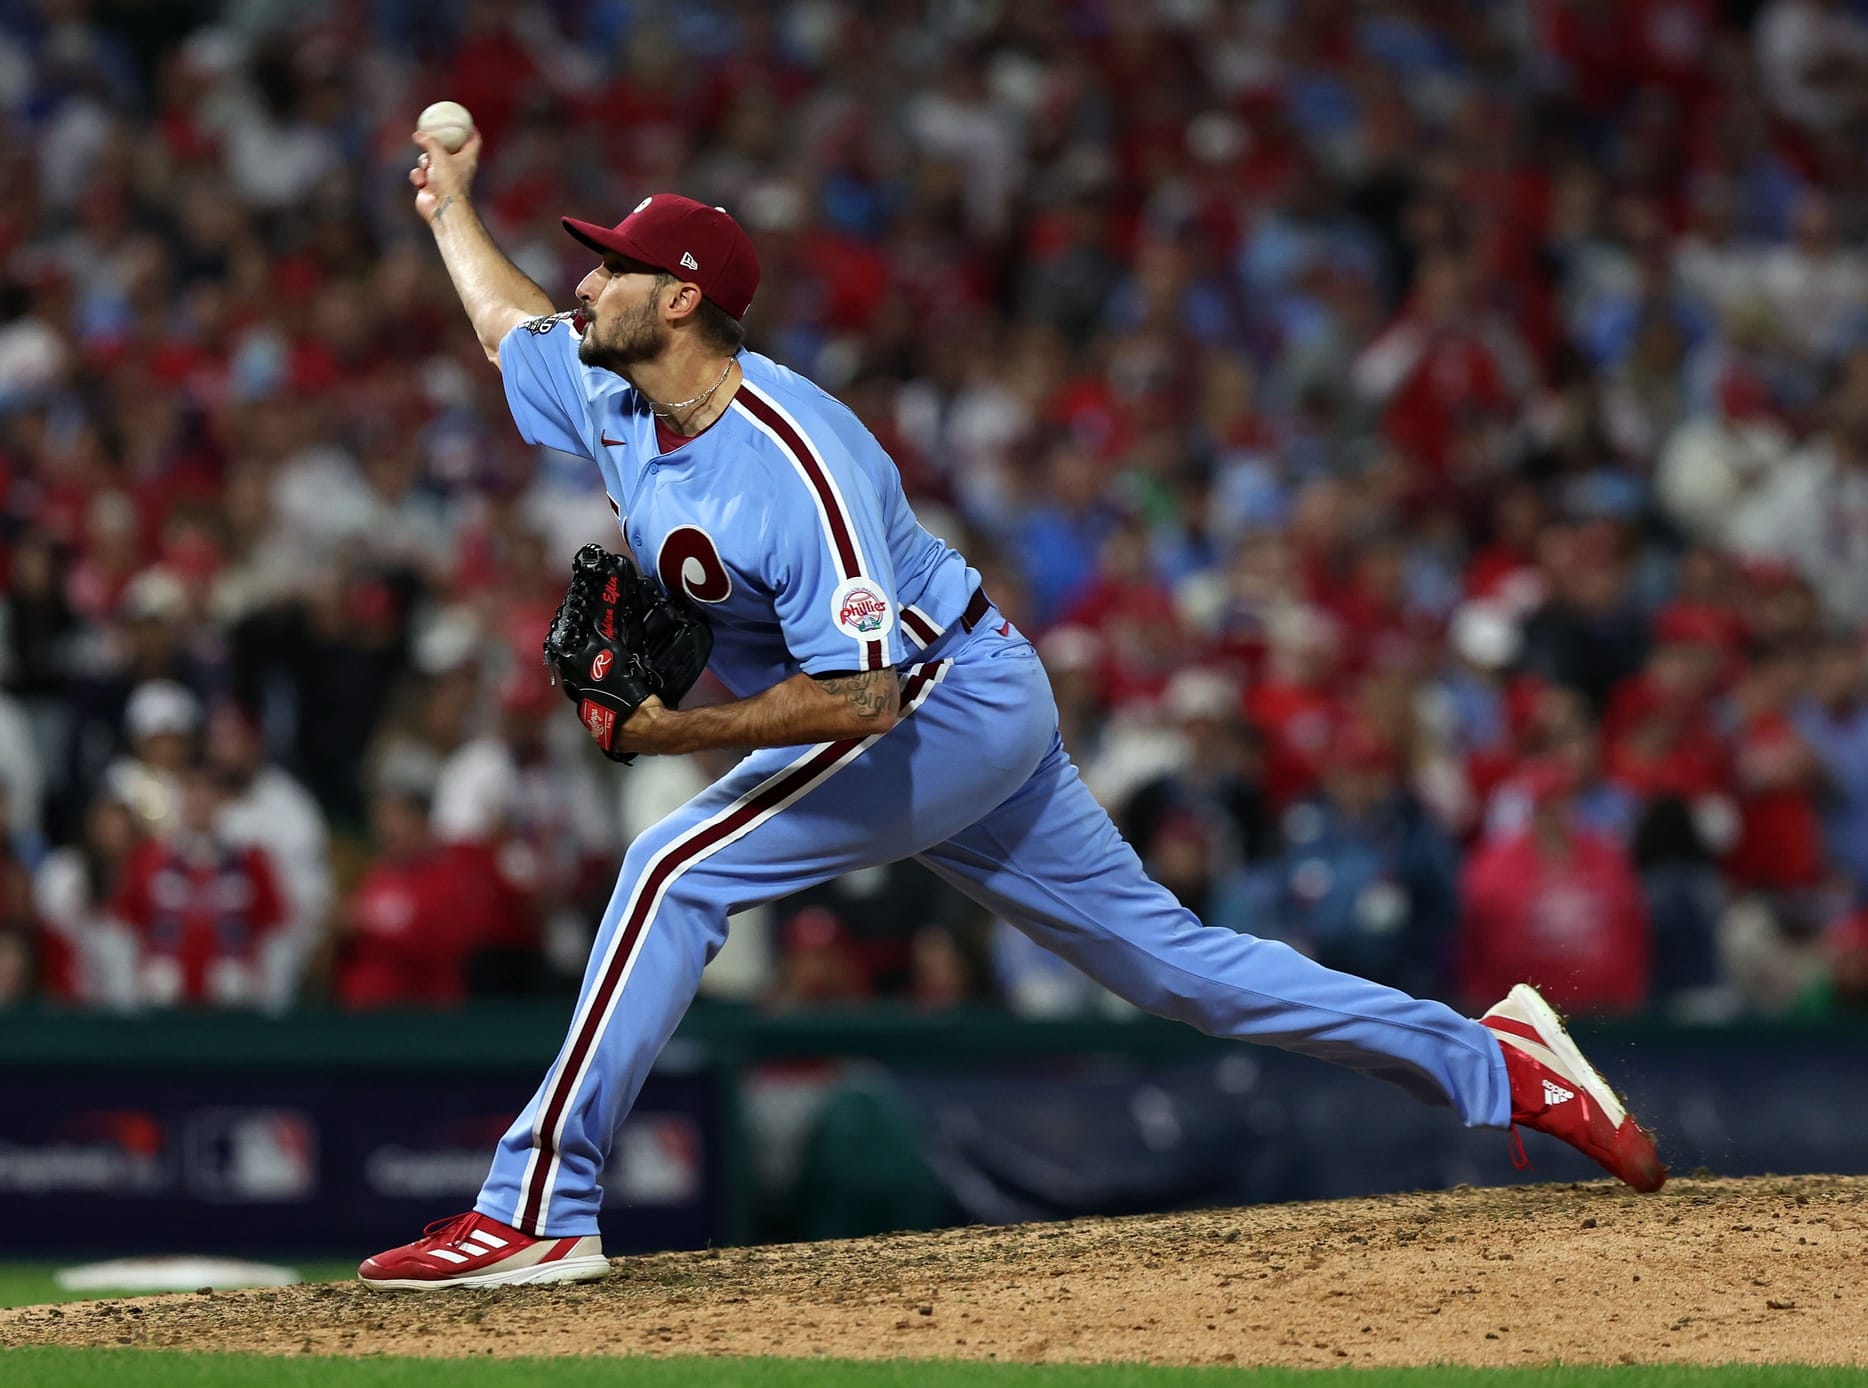 Good for Zach Eflin, who Signs the Biggest Free Agent Contract in Rays’ History